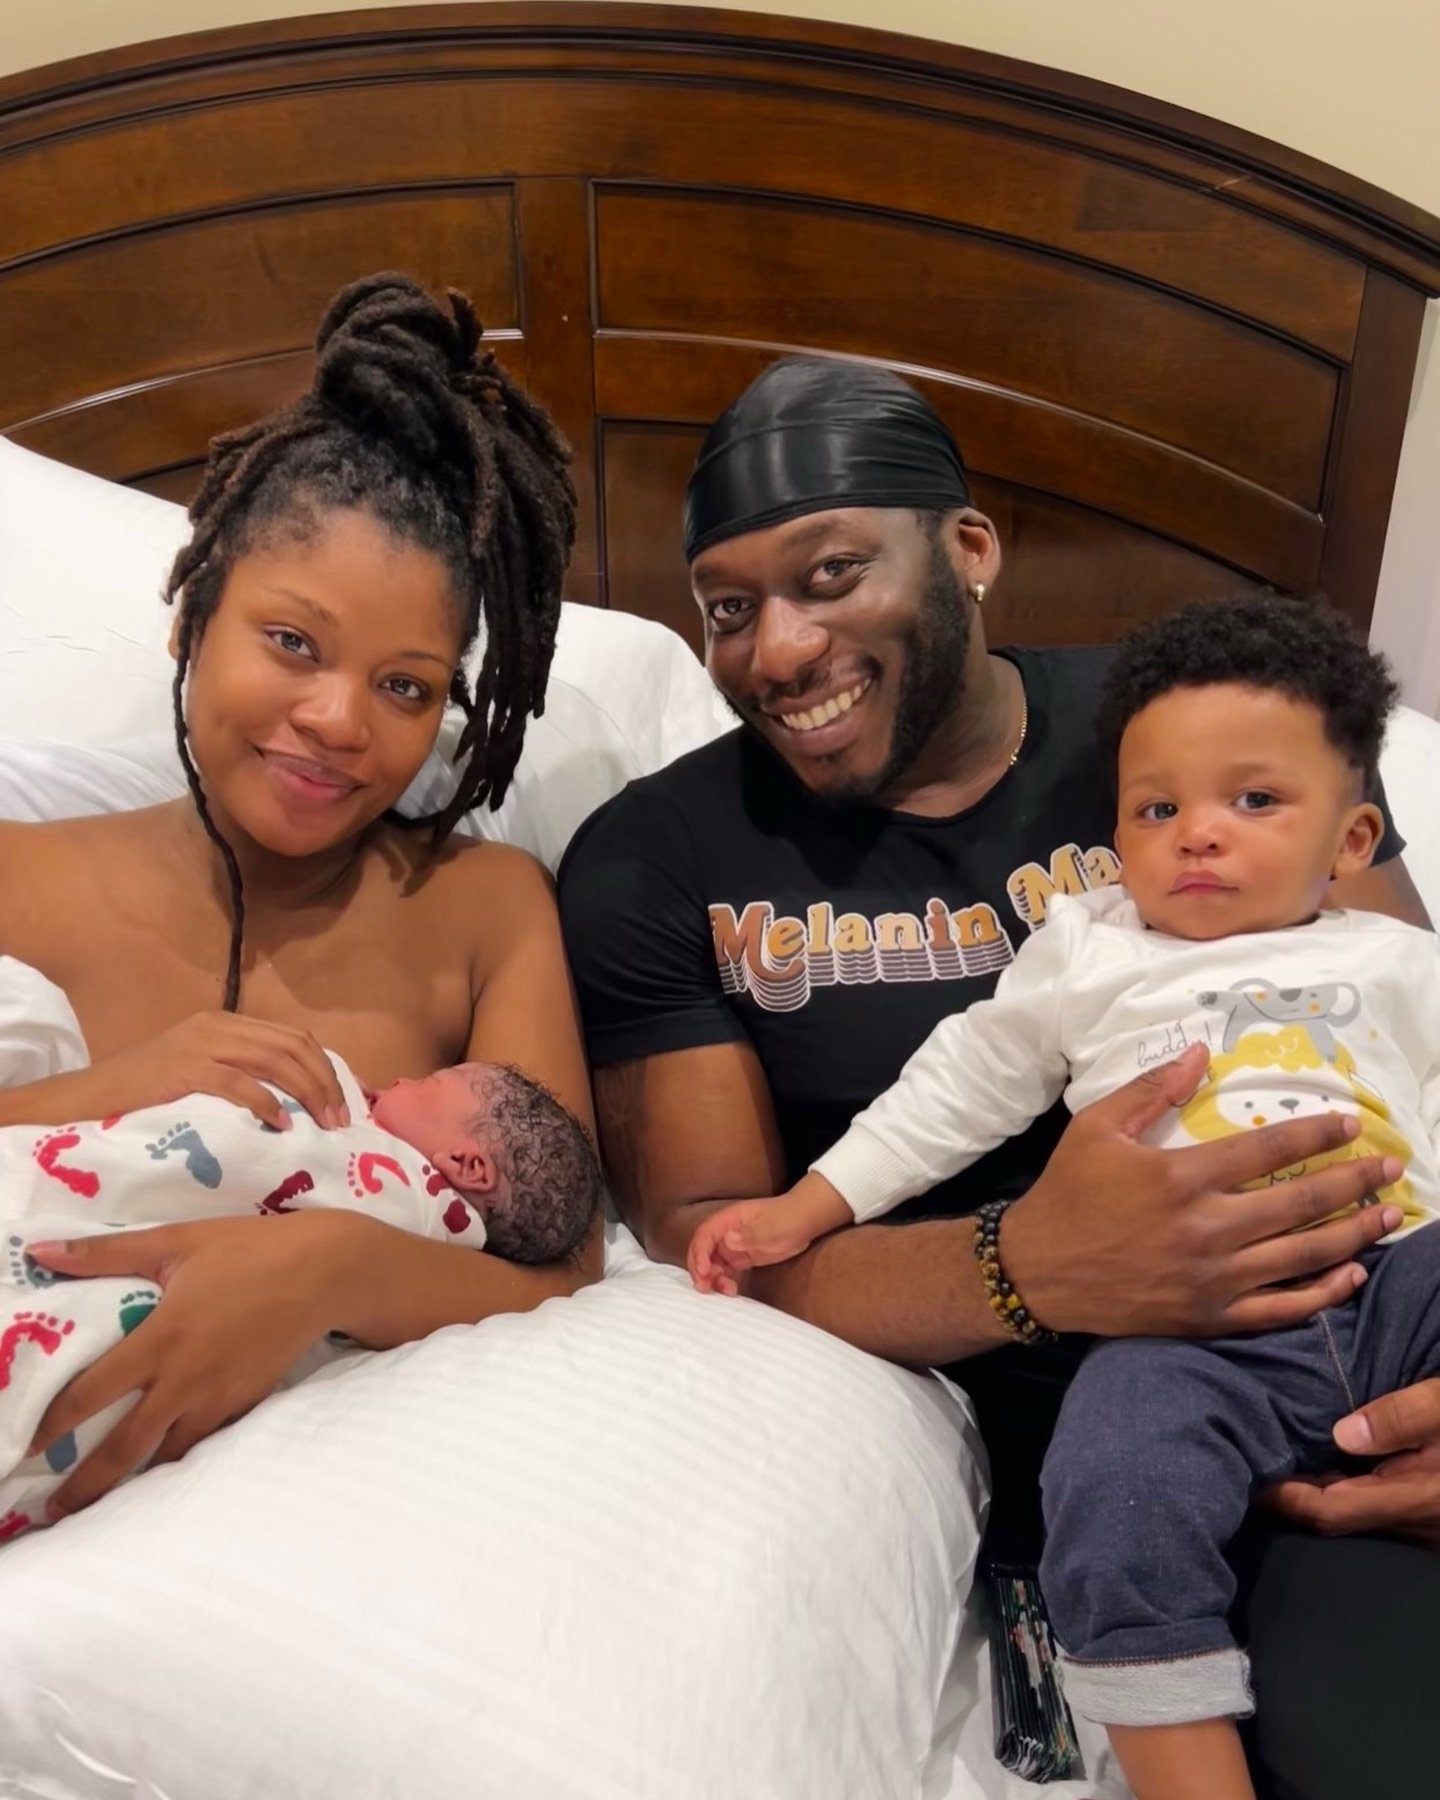 We did it! 🙌🏾🙏🏾🙏🏾🙌🏾

Thank you God for sending us our beautiful baby boy Okechukwu. We are in love with him already and he&rsquo;s already brought so much joy to our family. Thank you for the greatest honor of raising these two young Black ki